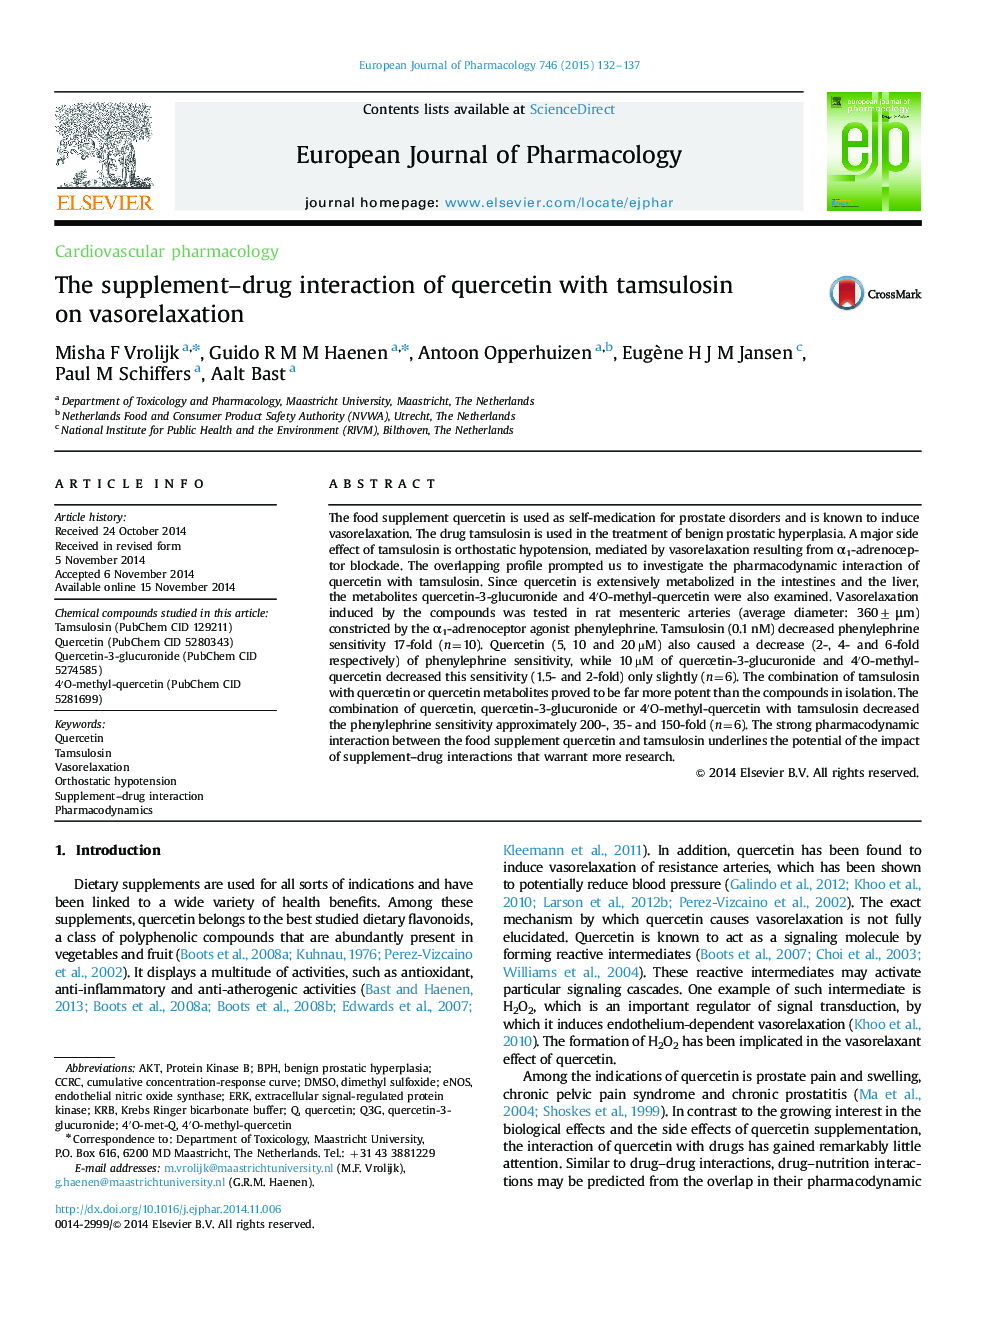 The supplement–drug interaction of quercetin with tamsulosin on vasorelaxation